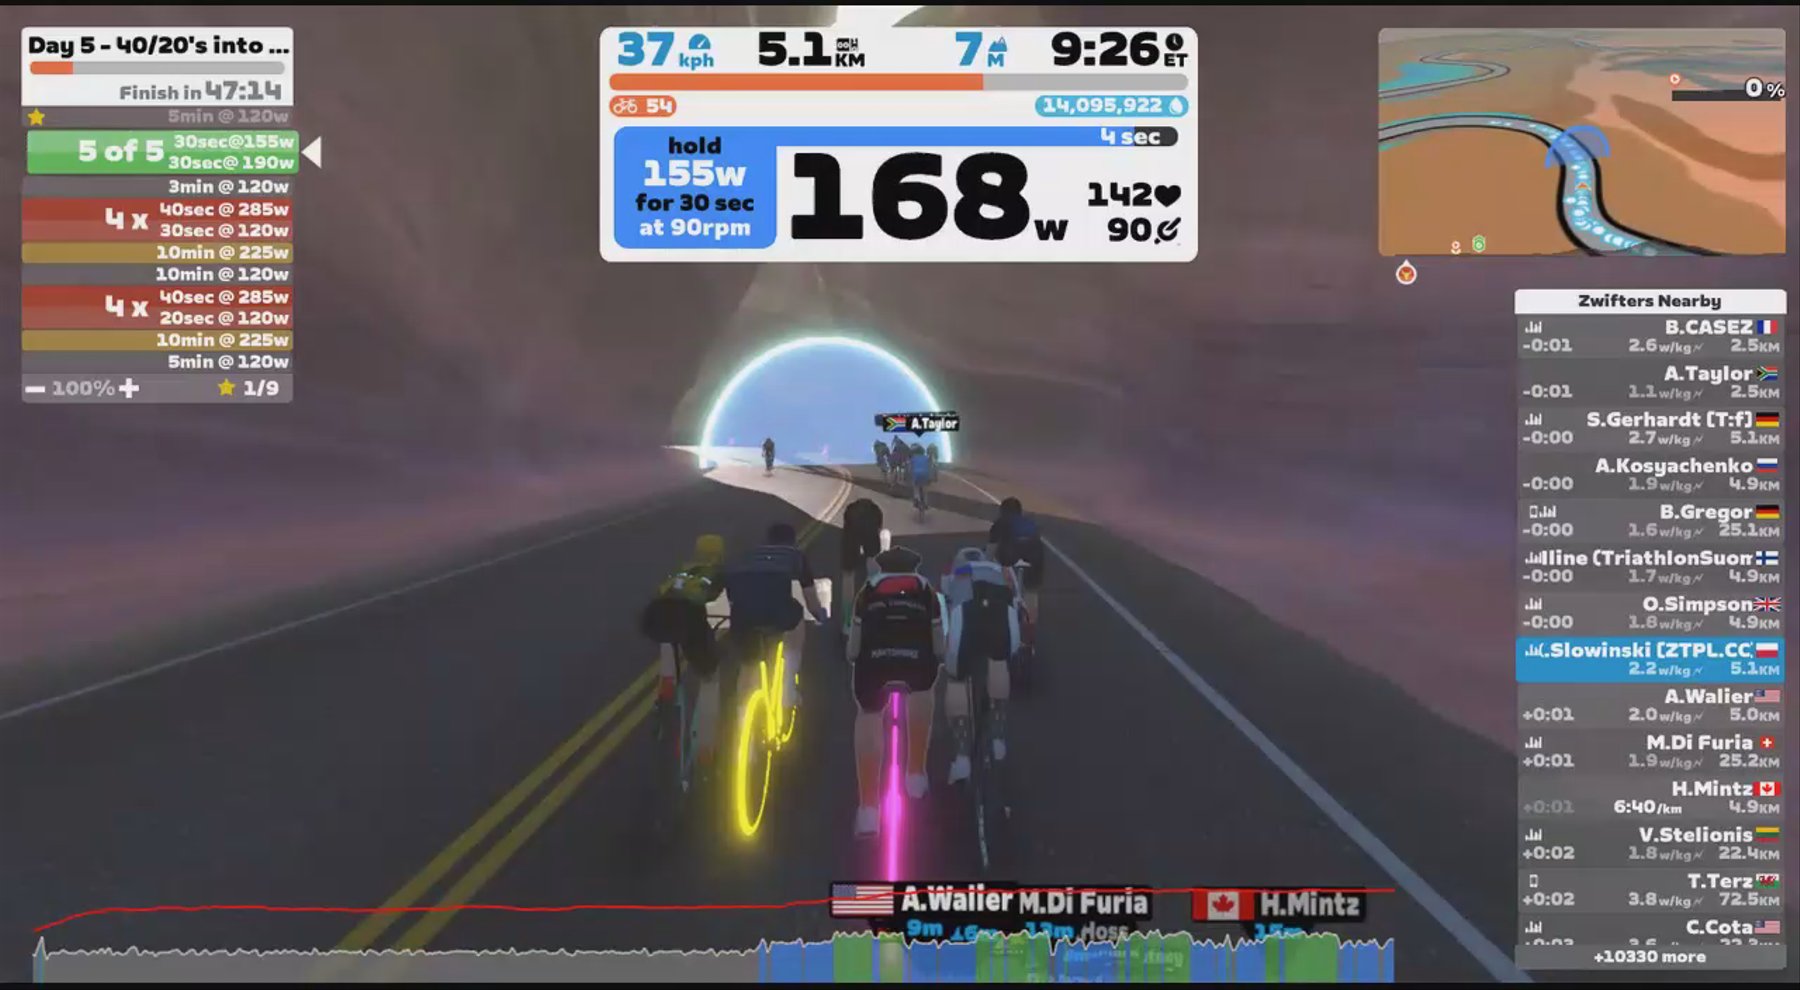 Zwift - Day 5 - 40/20's into Threshold in Watopia